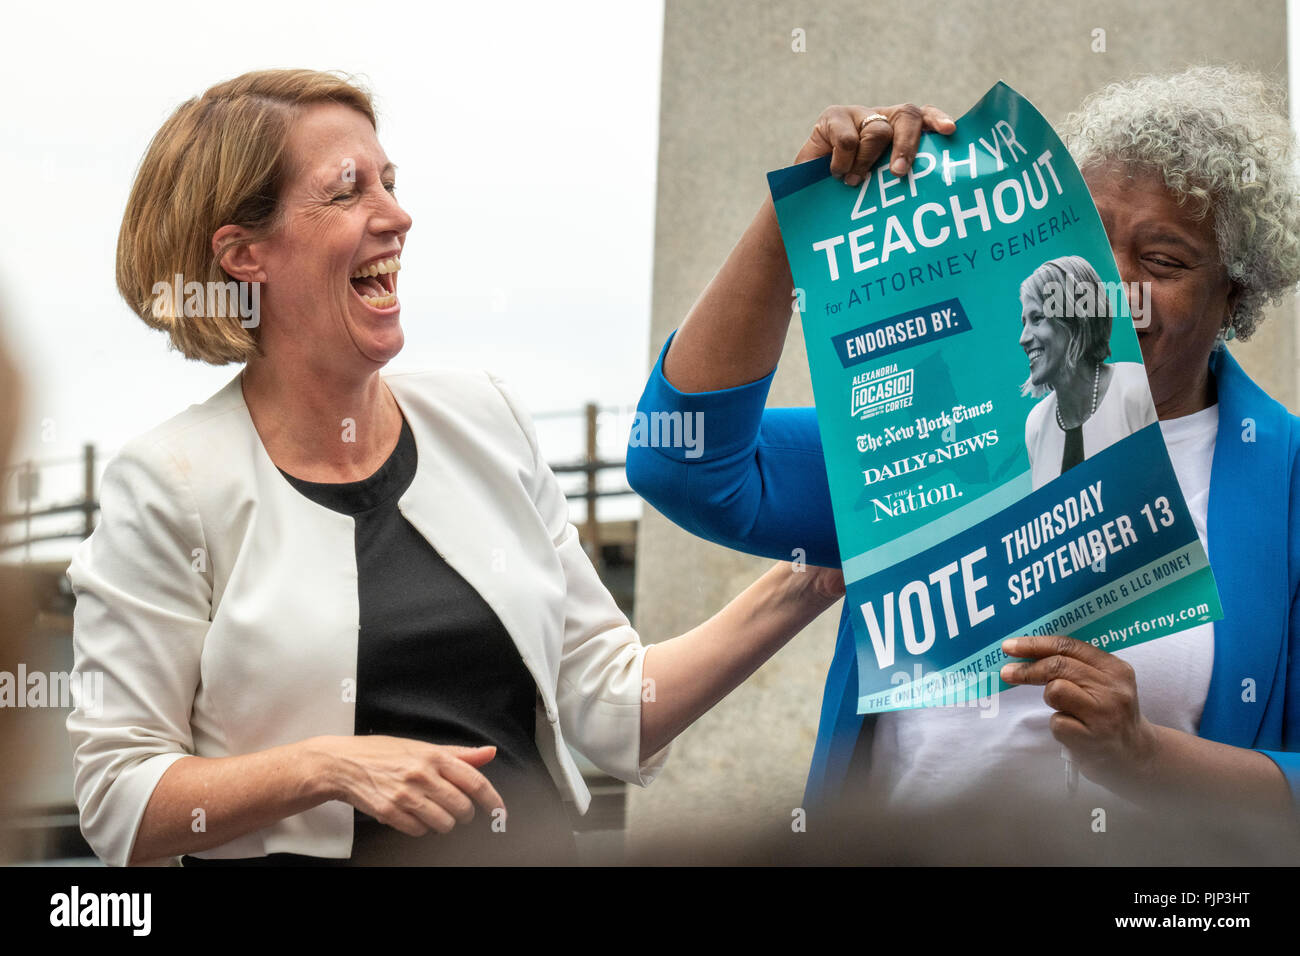 New York, USA,  8 September 2018.  Democratic candidate for New York General Attorney Zephyr Teachout during a campaign rally in Brooklyn.. Credit: Enrique Shore Credit: Enrique Shore/Alamy Live News Stock Photo